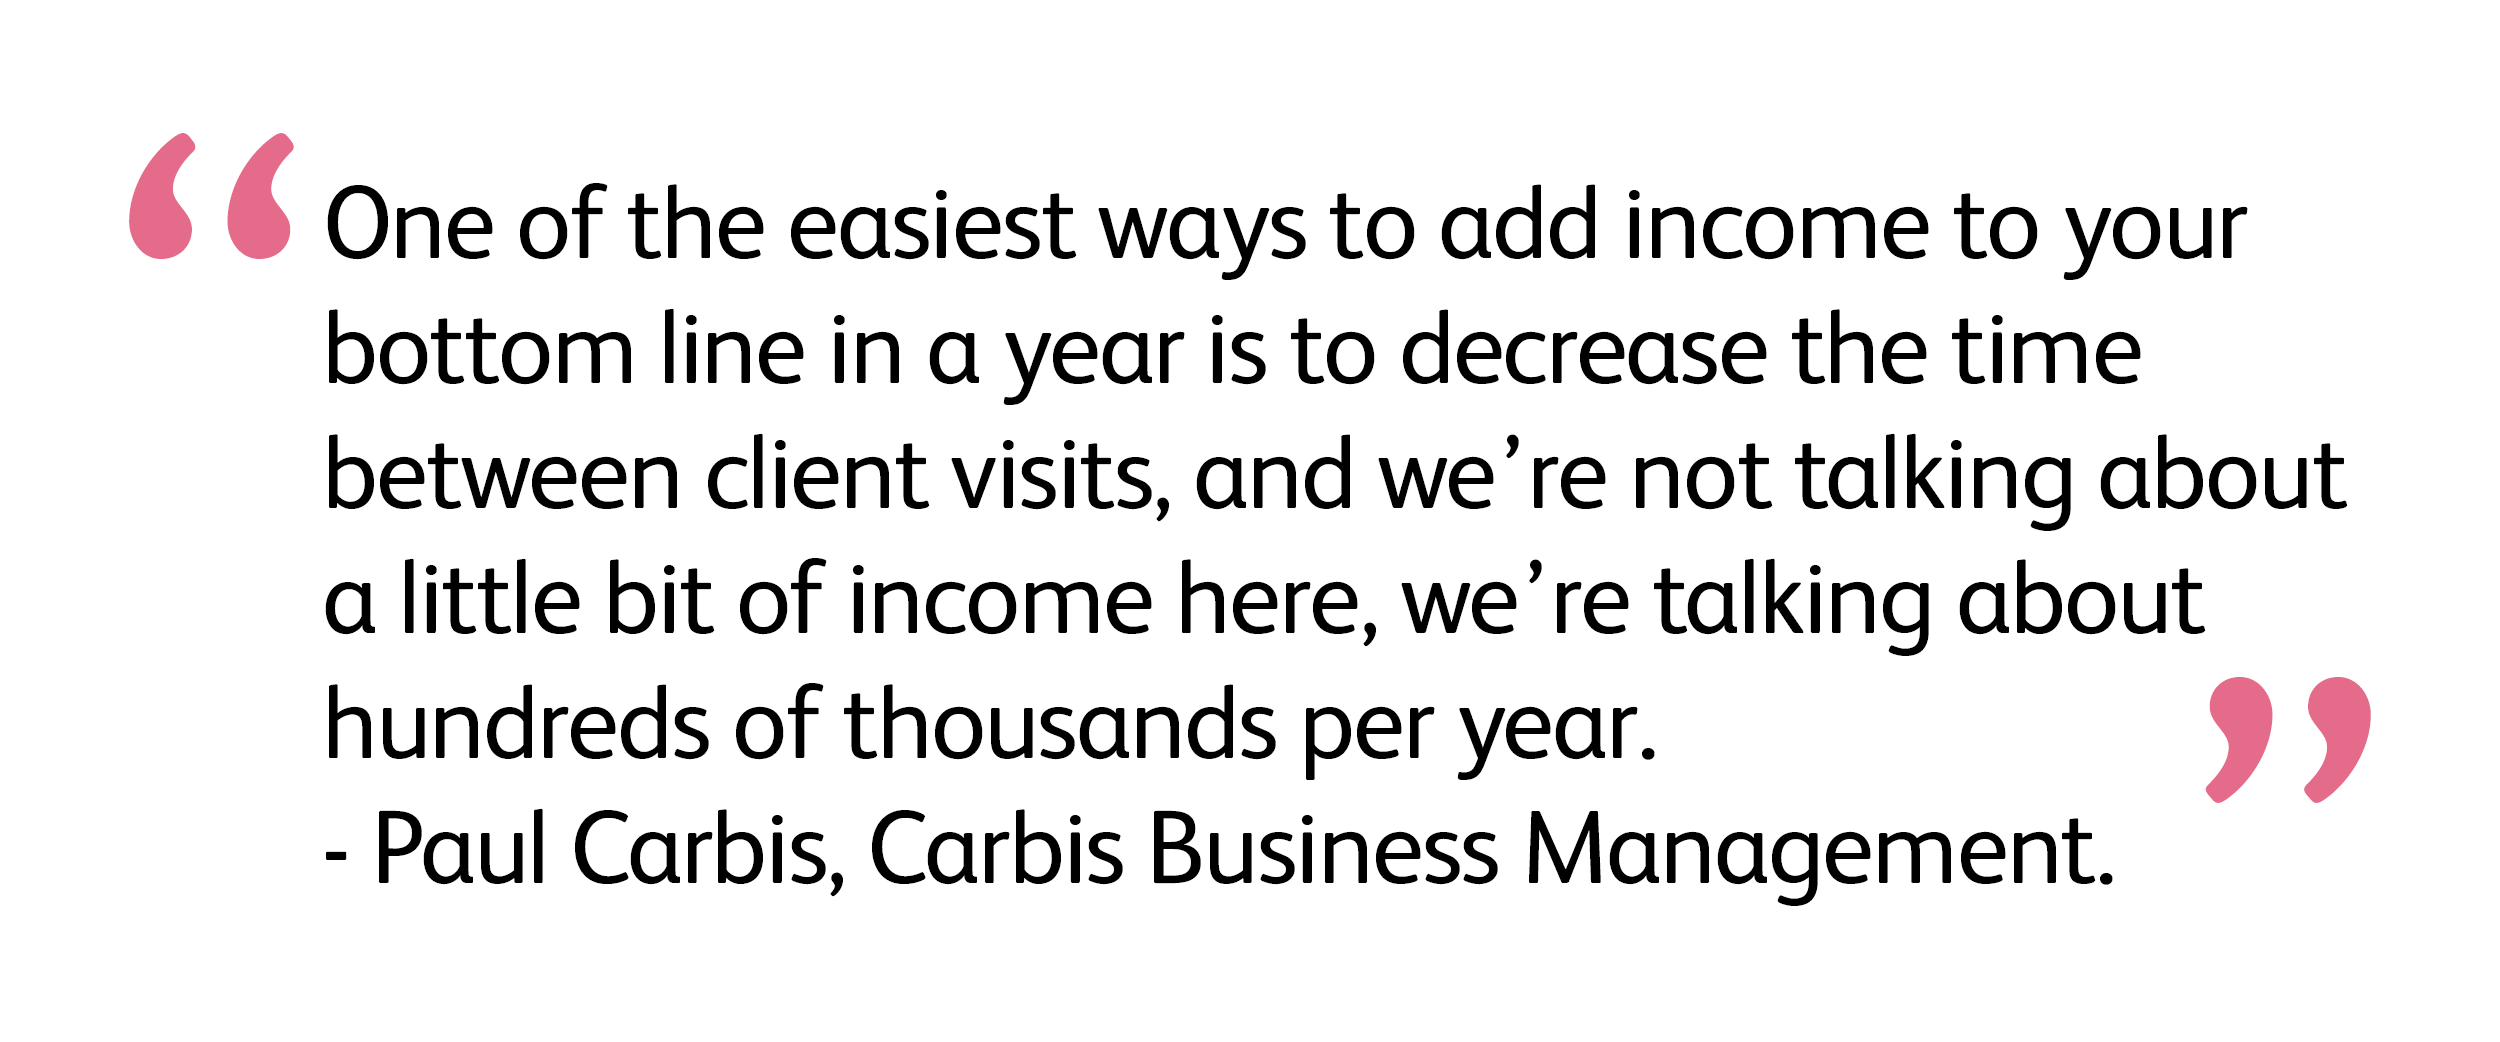 “One of the easiest ways to add income to your bottom line in a year is to decrease the time between client visits, and we’re not talking about a little bit of income here, we’re talking about hundreds of thousands per year.” - Paul Carbis, Carbis Business Management. 